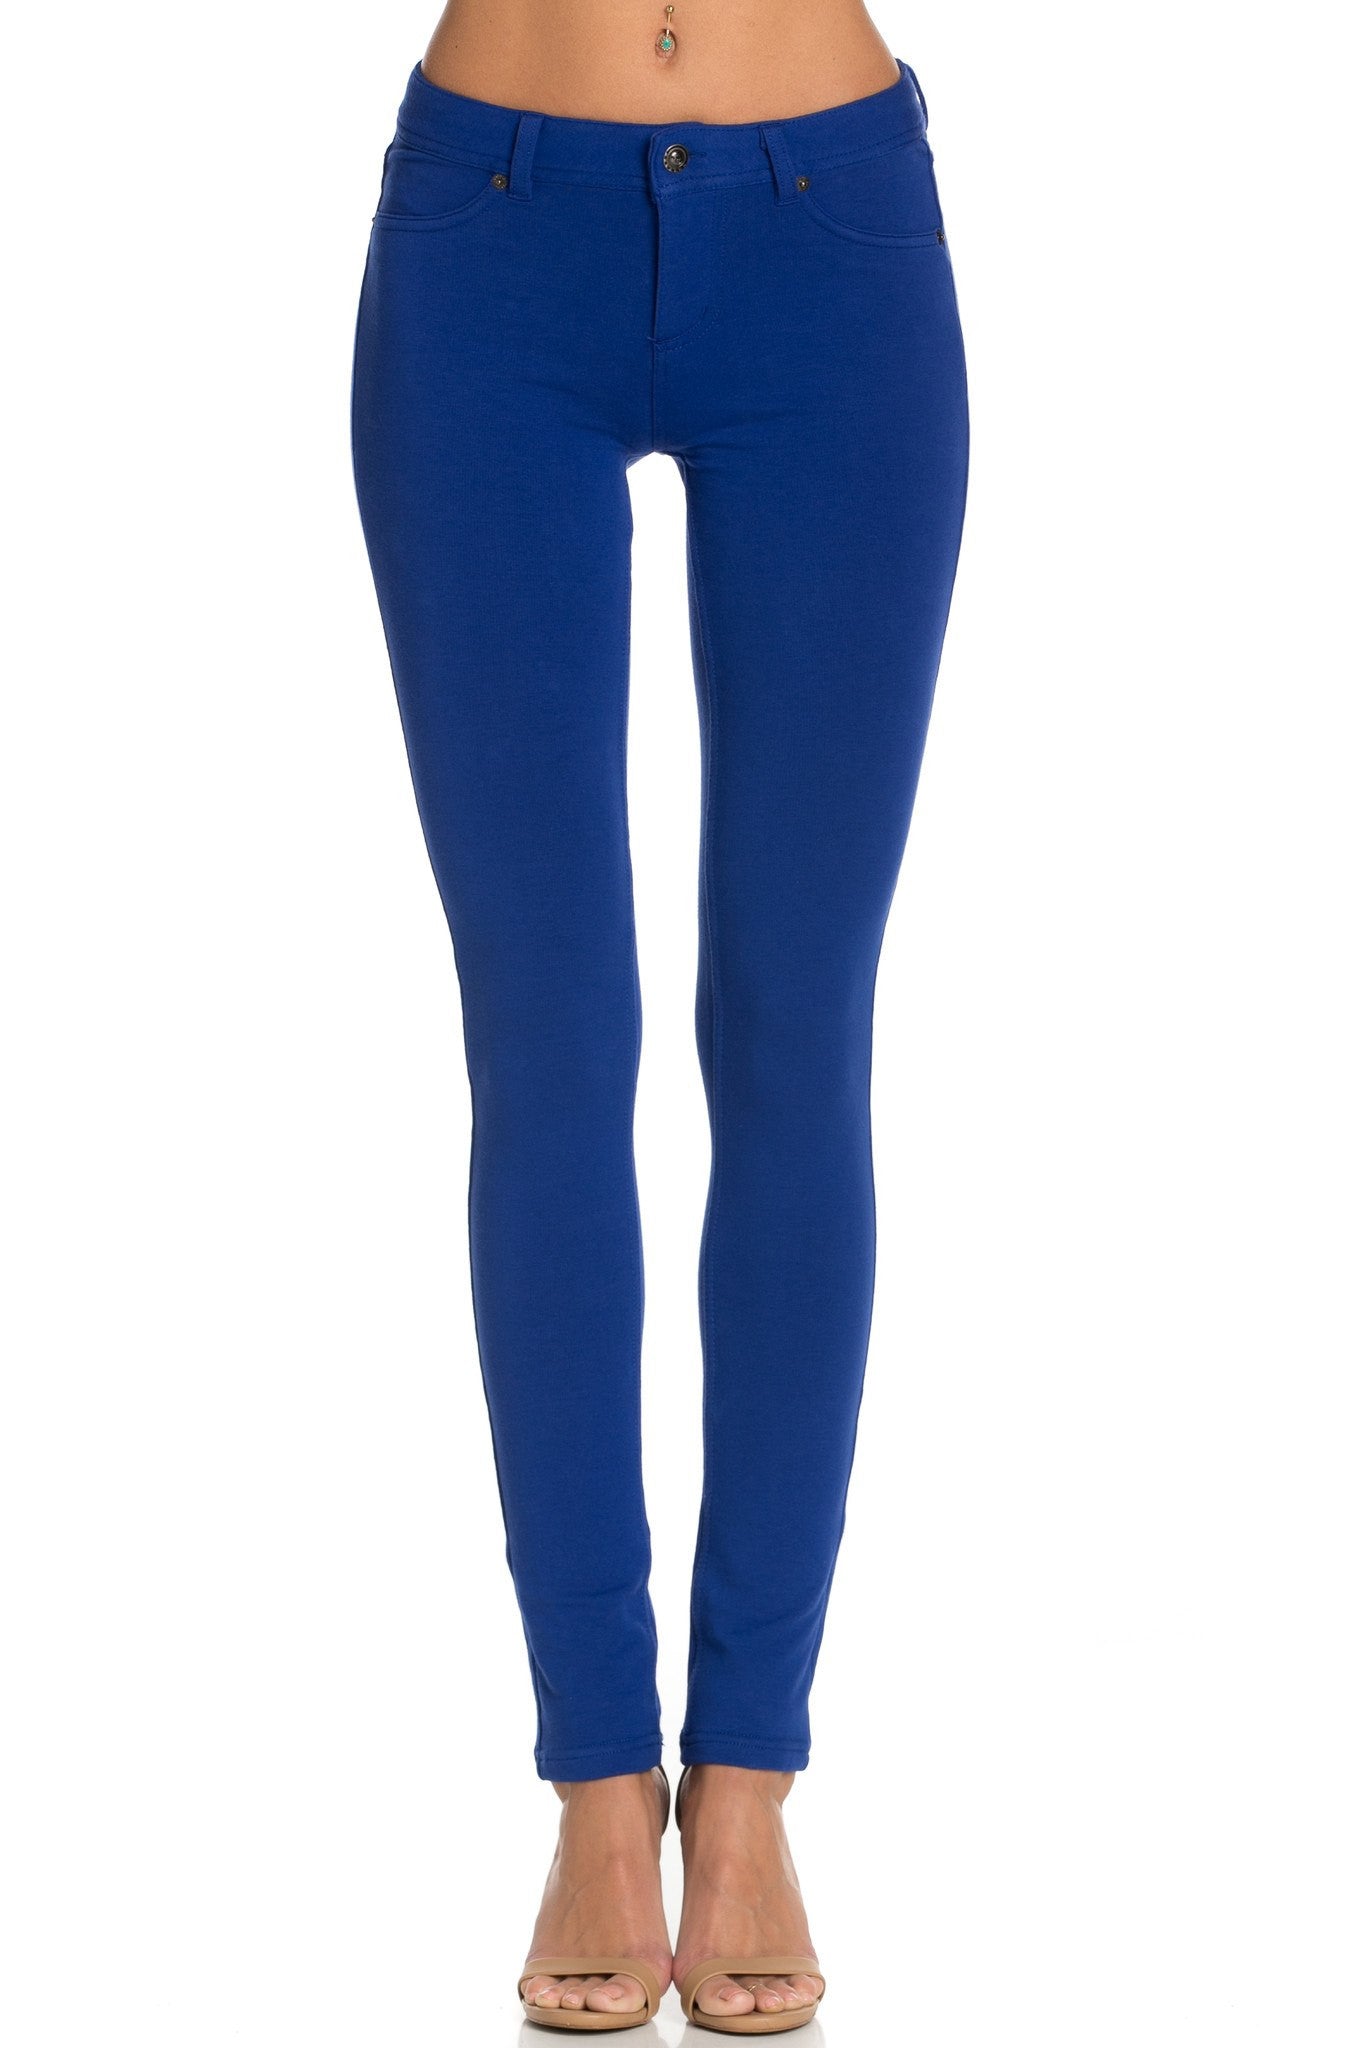 Royal blue camo jeggings with rhinestone details